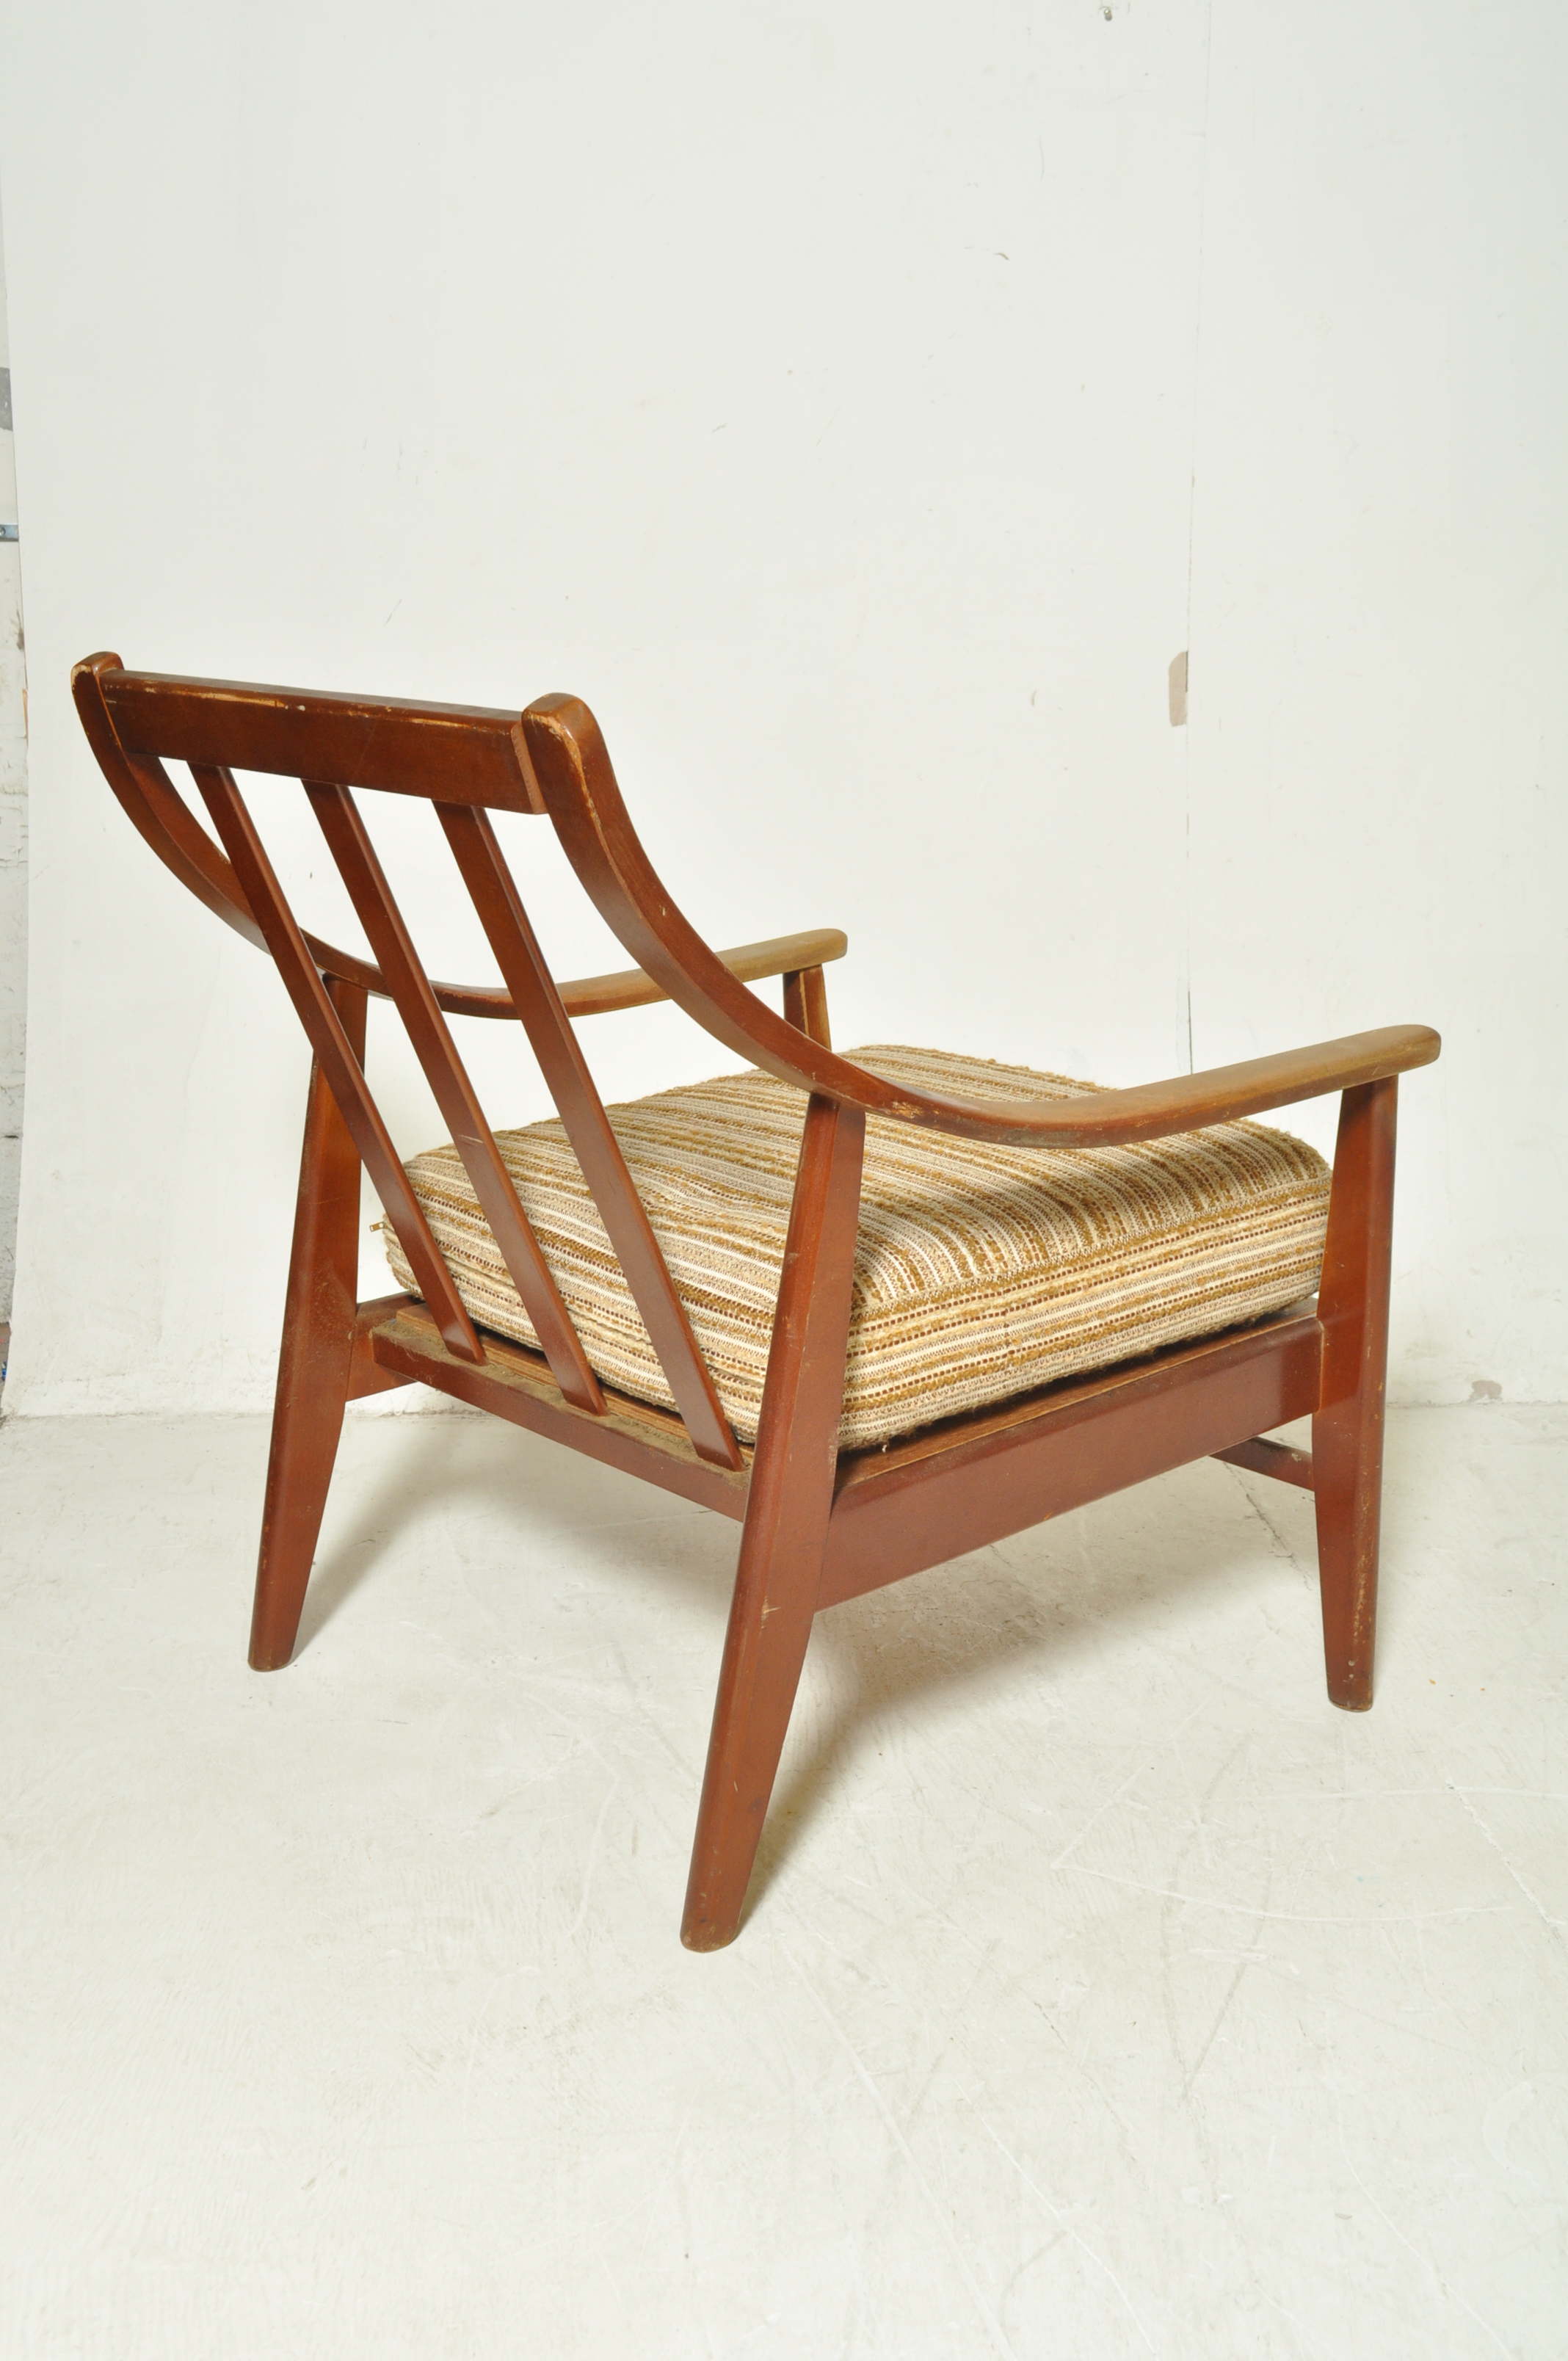 MID 20TH CENTURY DANISH INSPIRED SHOW WOOD EASY CHAIR - Image 5 of 5